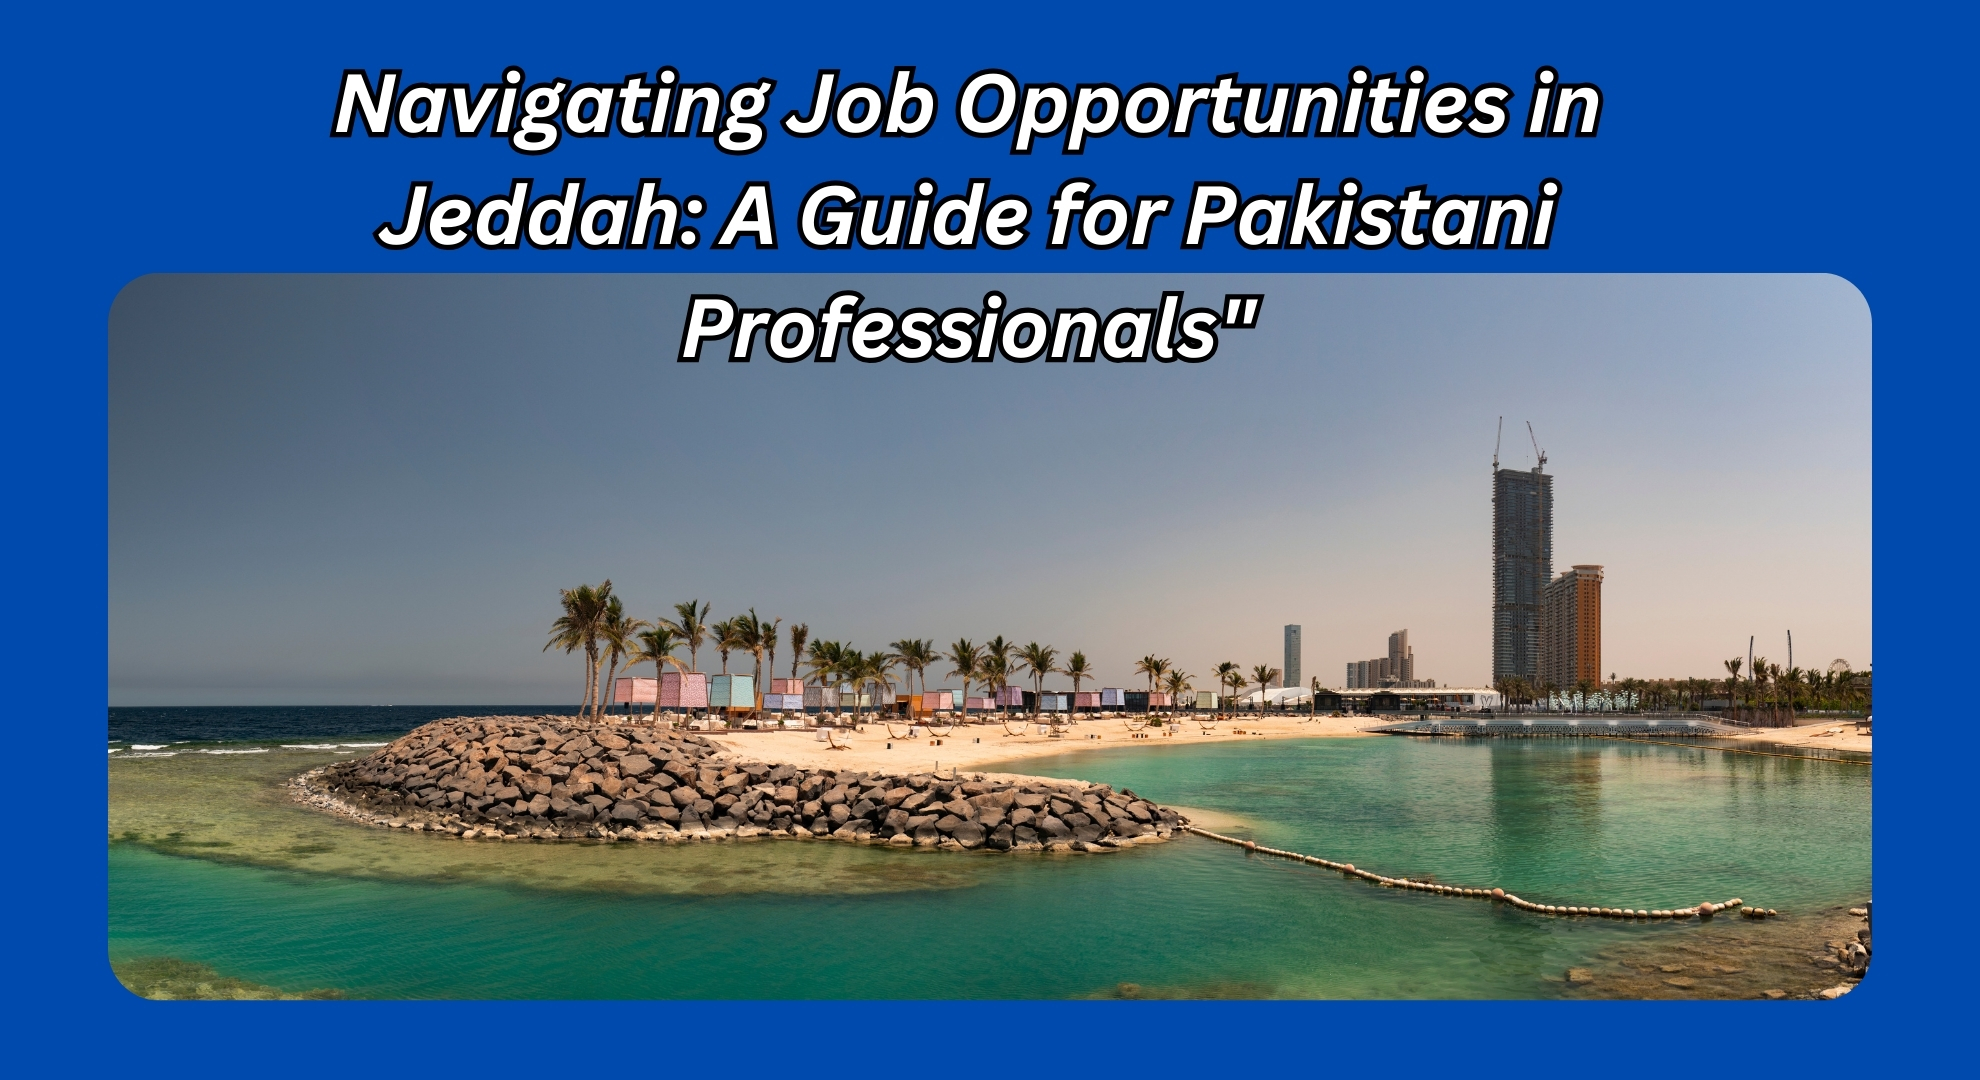 Navigating Job Opportunities in Jeddah: A Guide for Pakistani Professionals"